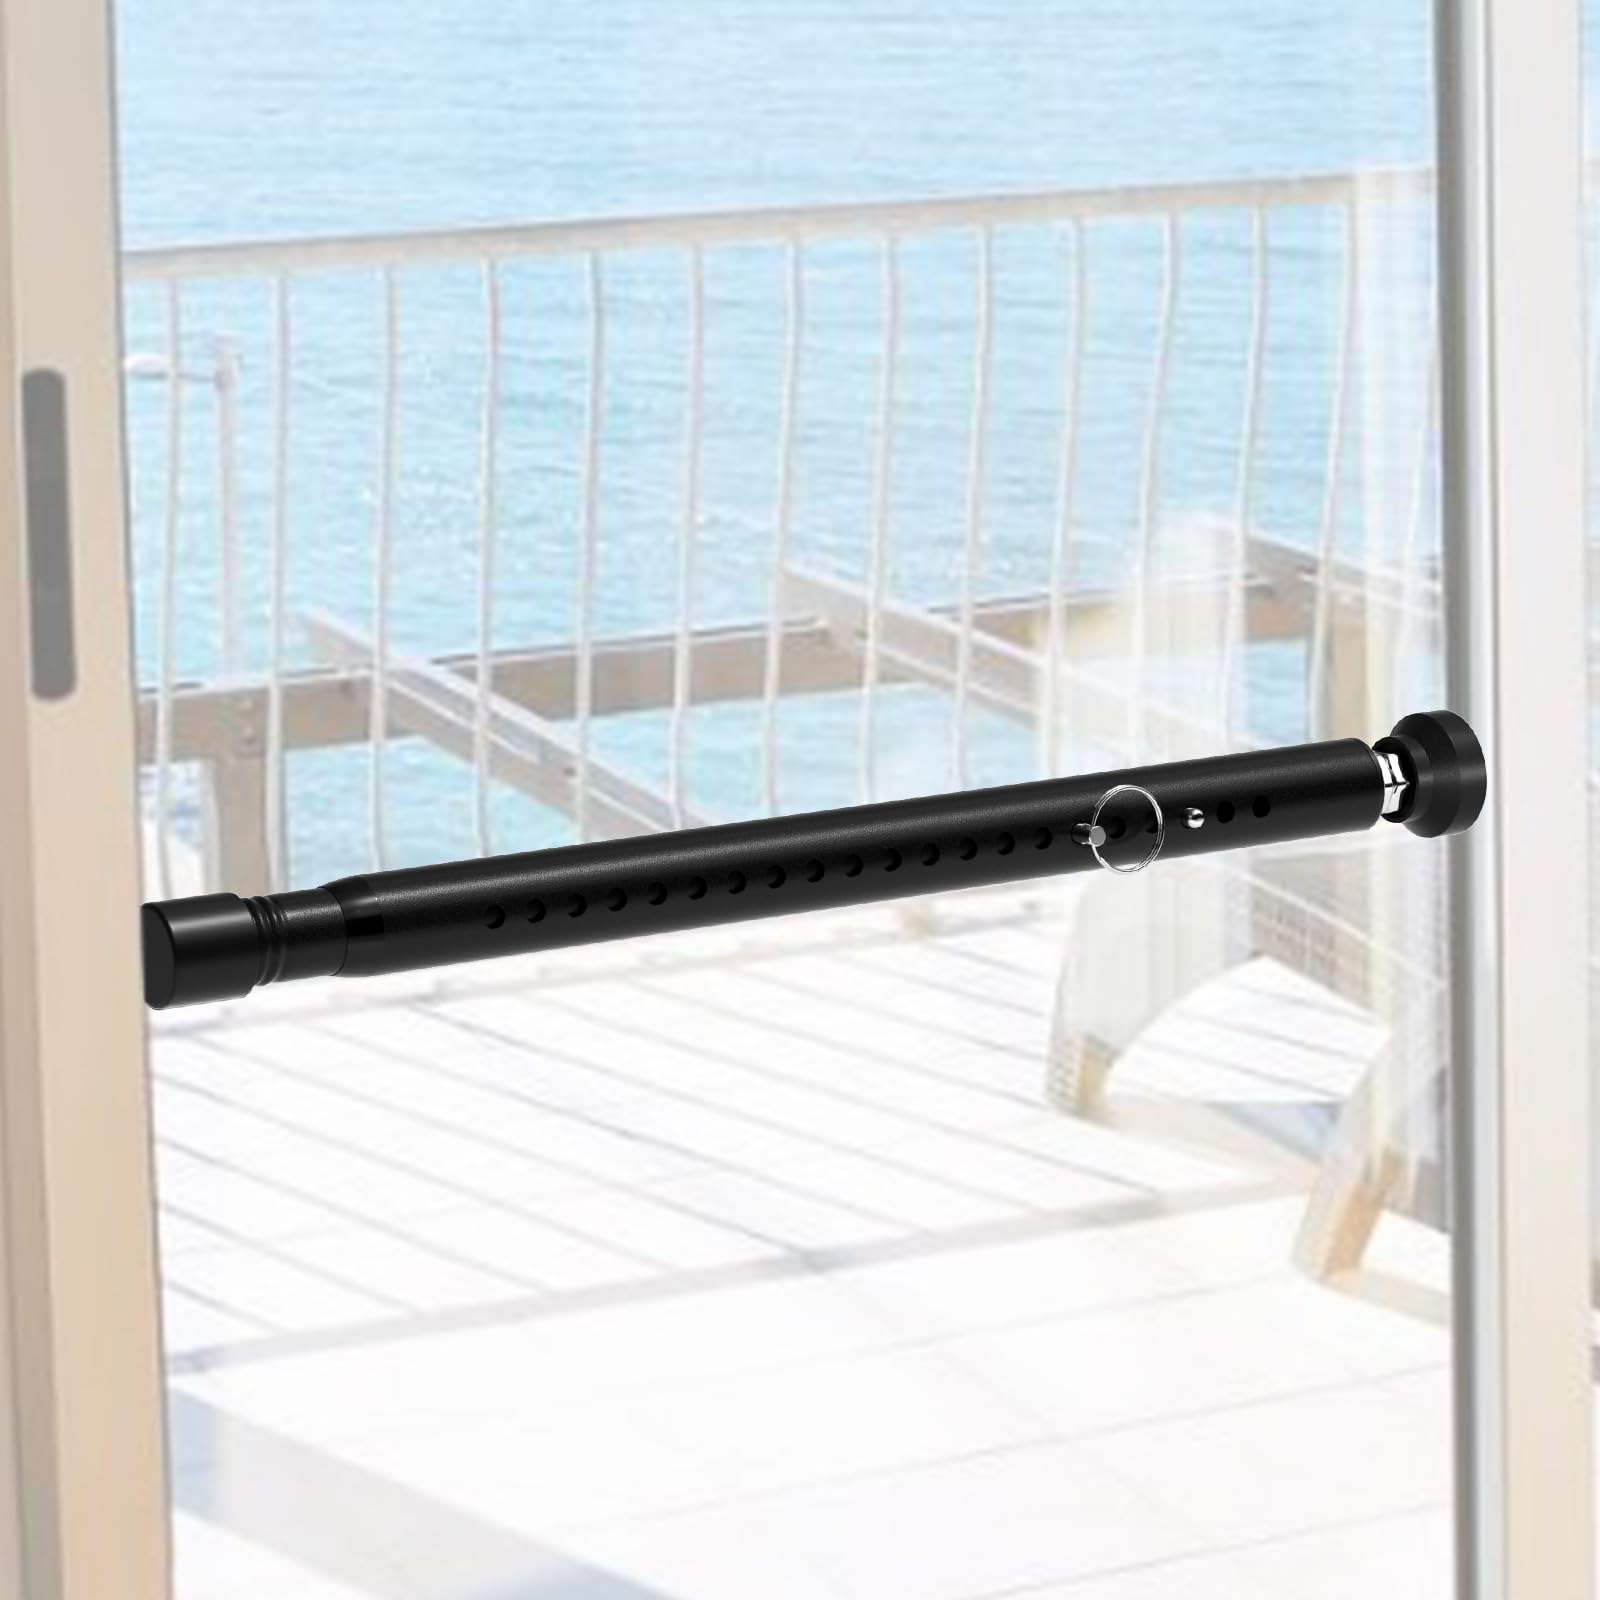 BsBsBest Window Security Bars Inside Adjustable 18 to 51 Inch Sliding Door Security Bar interior Black 1 Pack Window Locks Security up and Down Window Bars Security Extendable